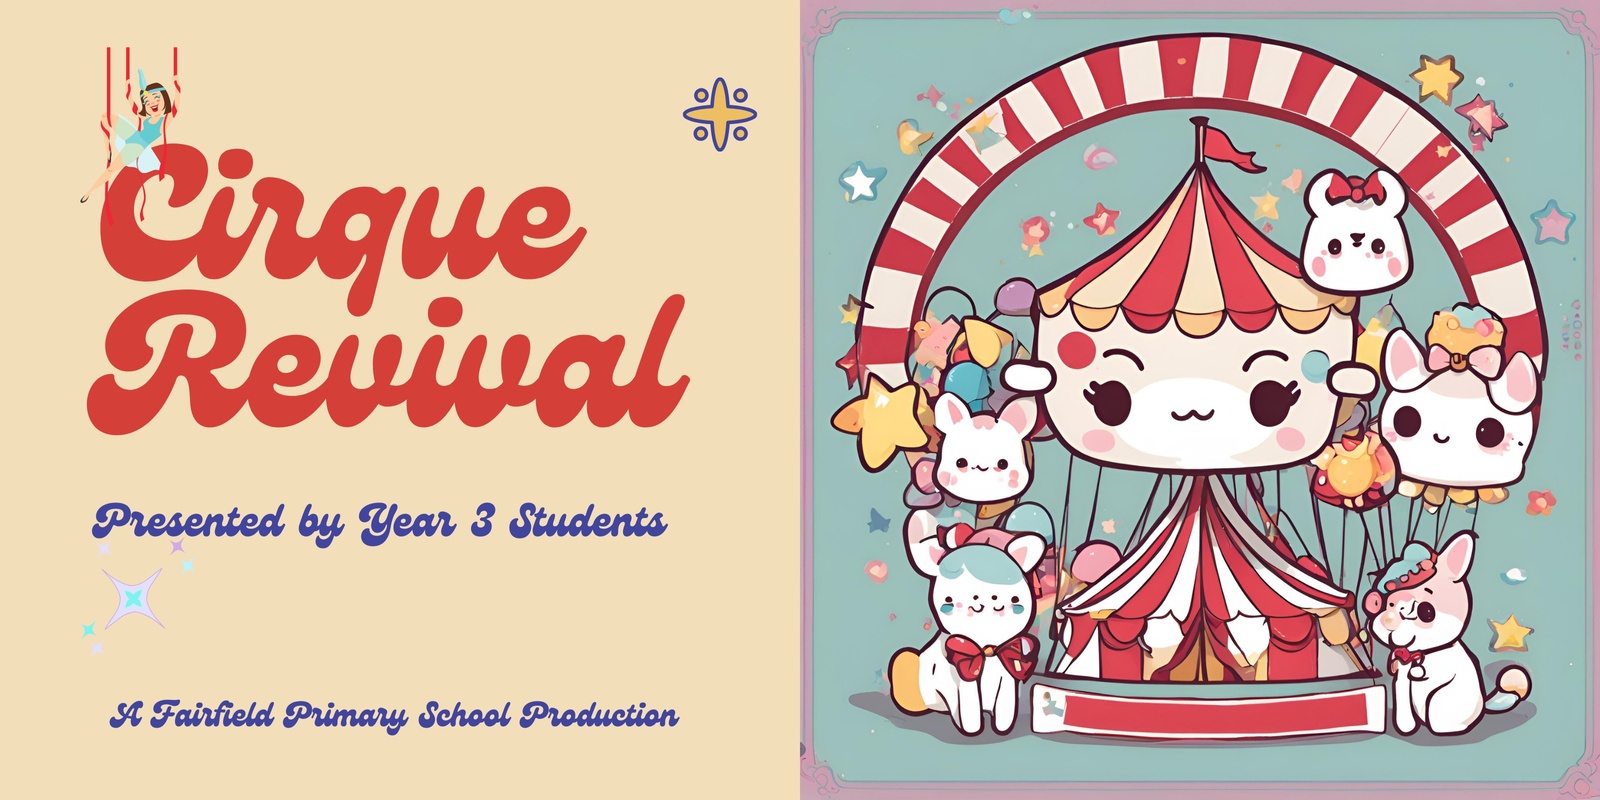 Banner image for Cirque Revival! A Year 3 Fairfield PS Production